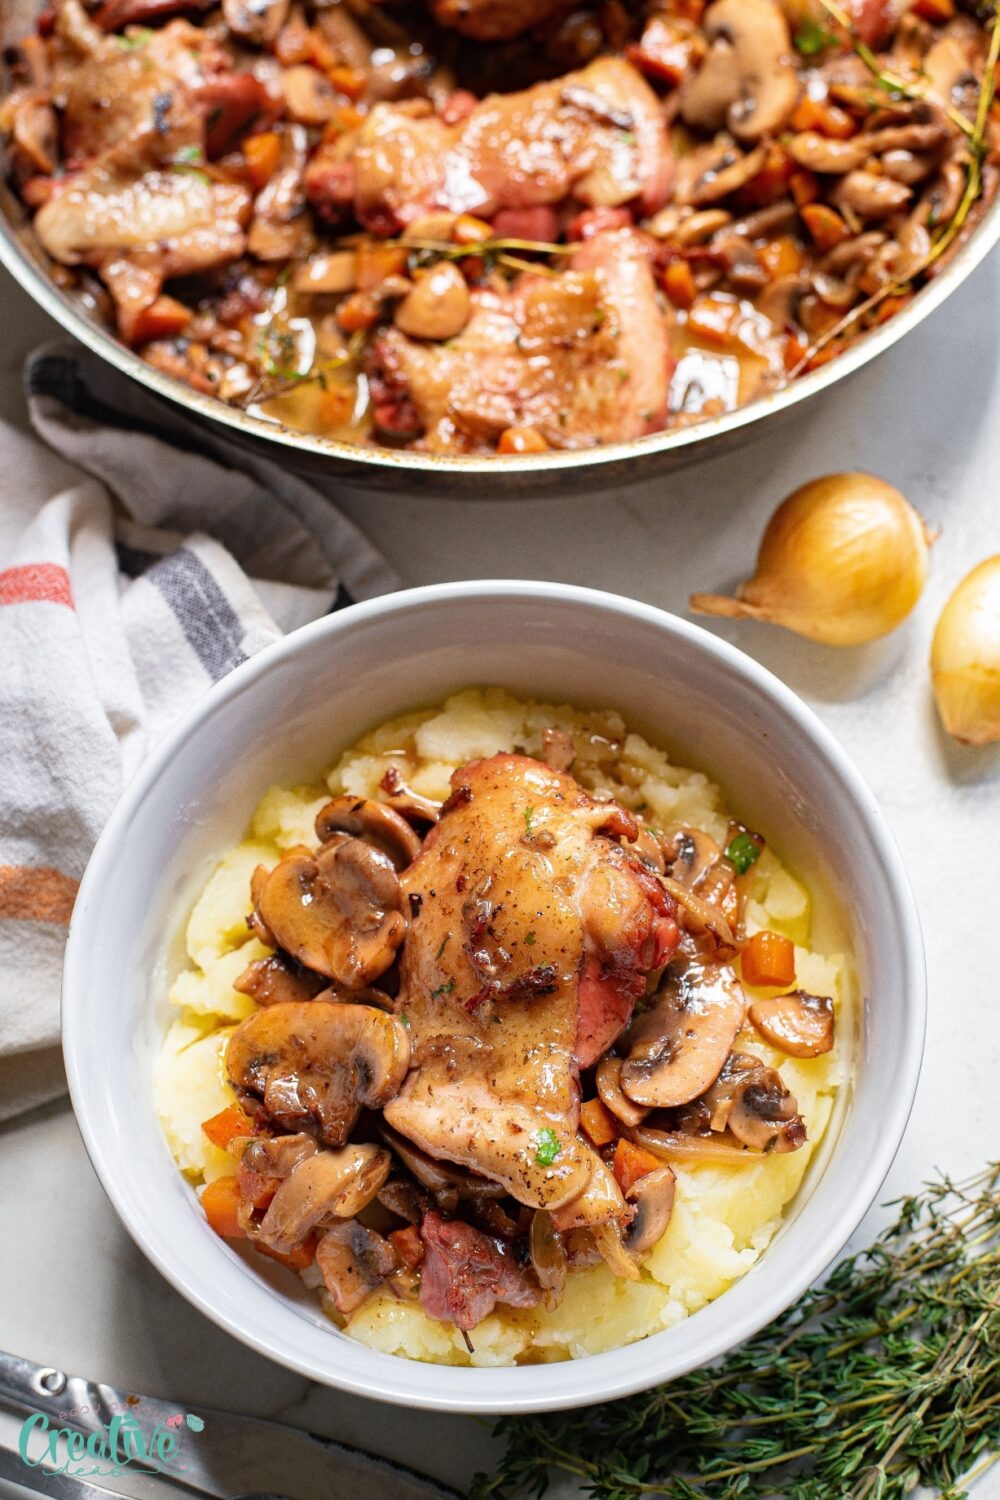 Skillet chicken thighs recipe with mushrooms and onions - a delicious and savory meal cooked to perfection.